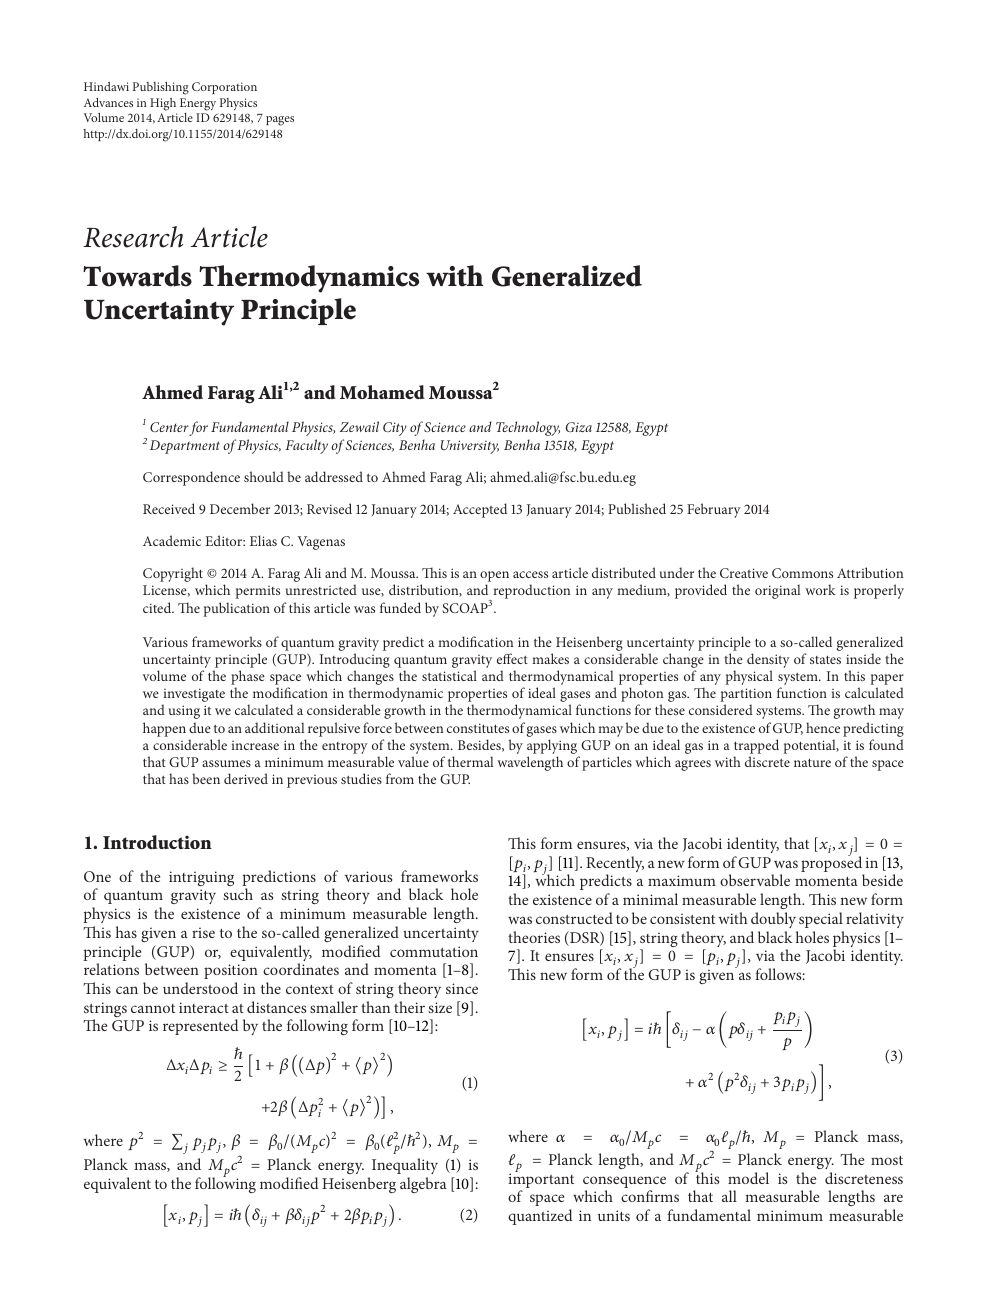 Towards Thermodynamics With Generalized Uncertainty Principle Topic Of Research Paper In Physical Sciences Download Scholarly Article Pdf And Read For Free On Cyberleninka Open Science Hub